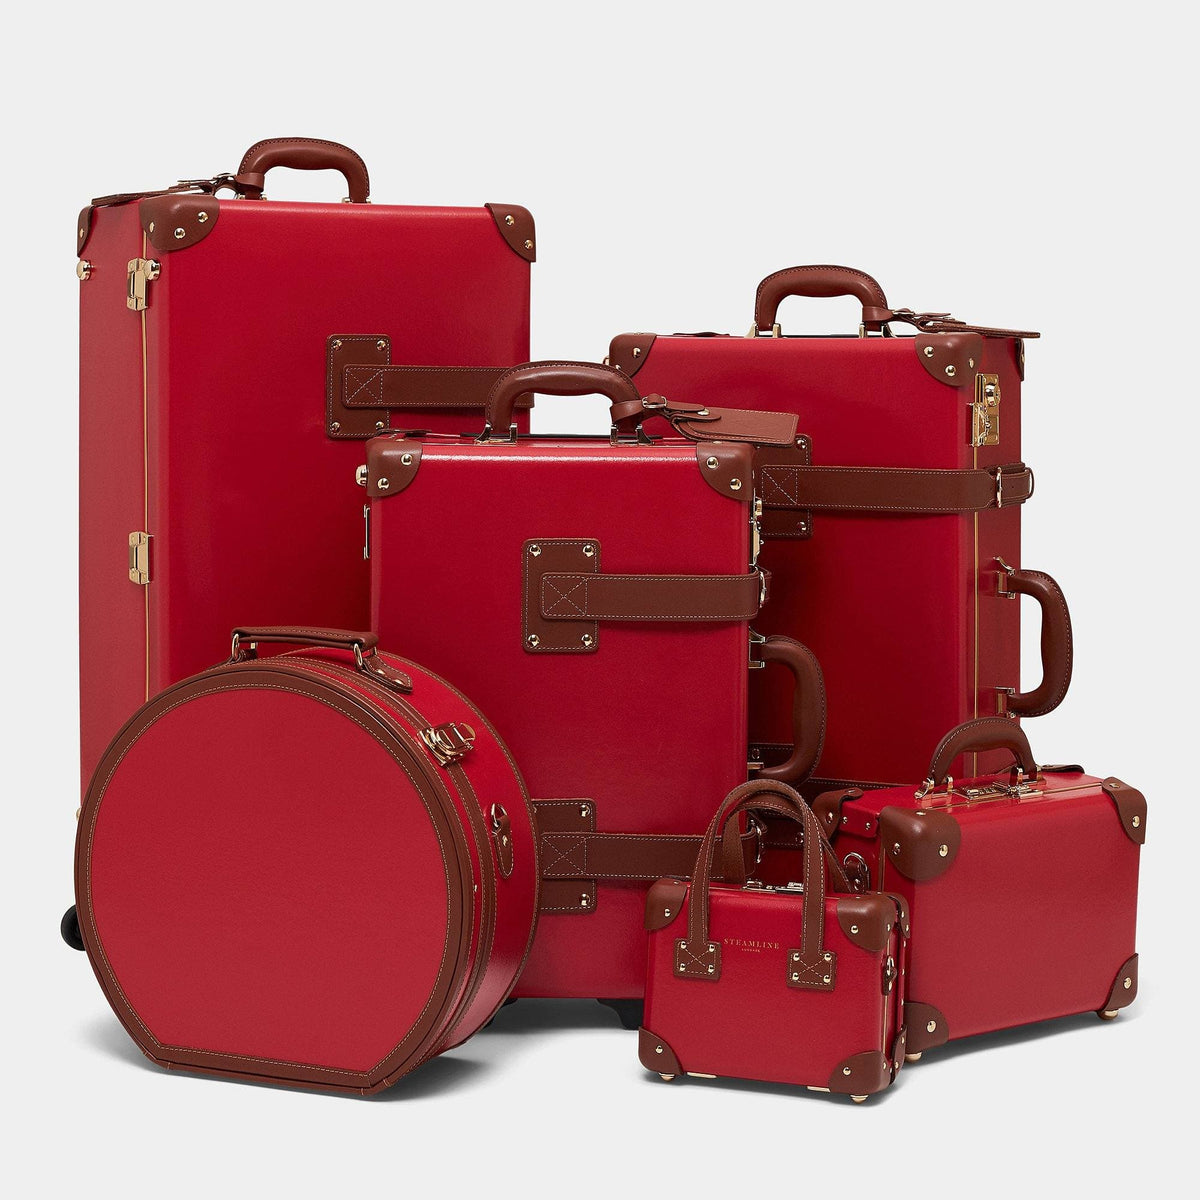 The Diplomat - Red Carryon Carryon Steamline Luggage 